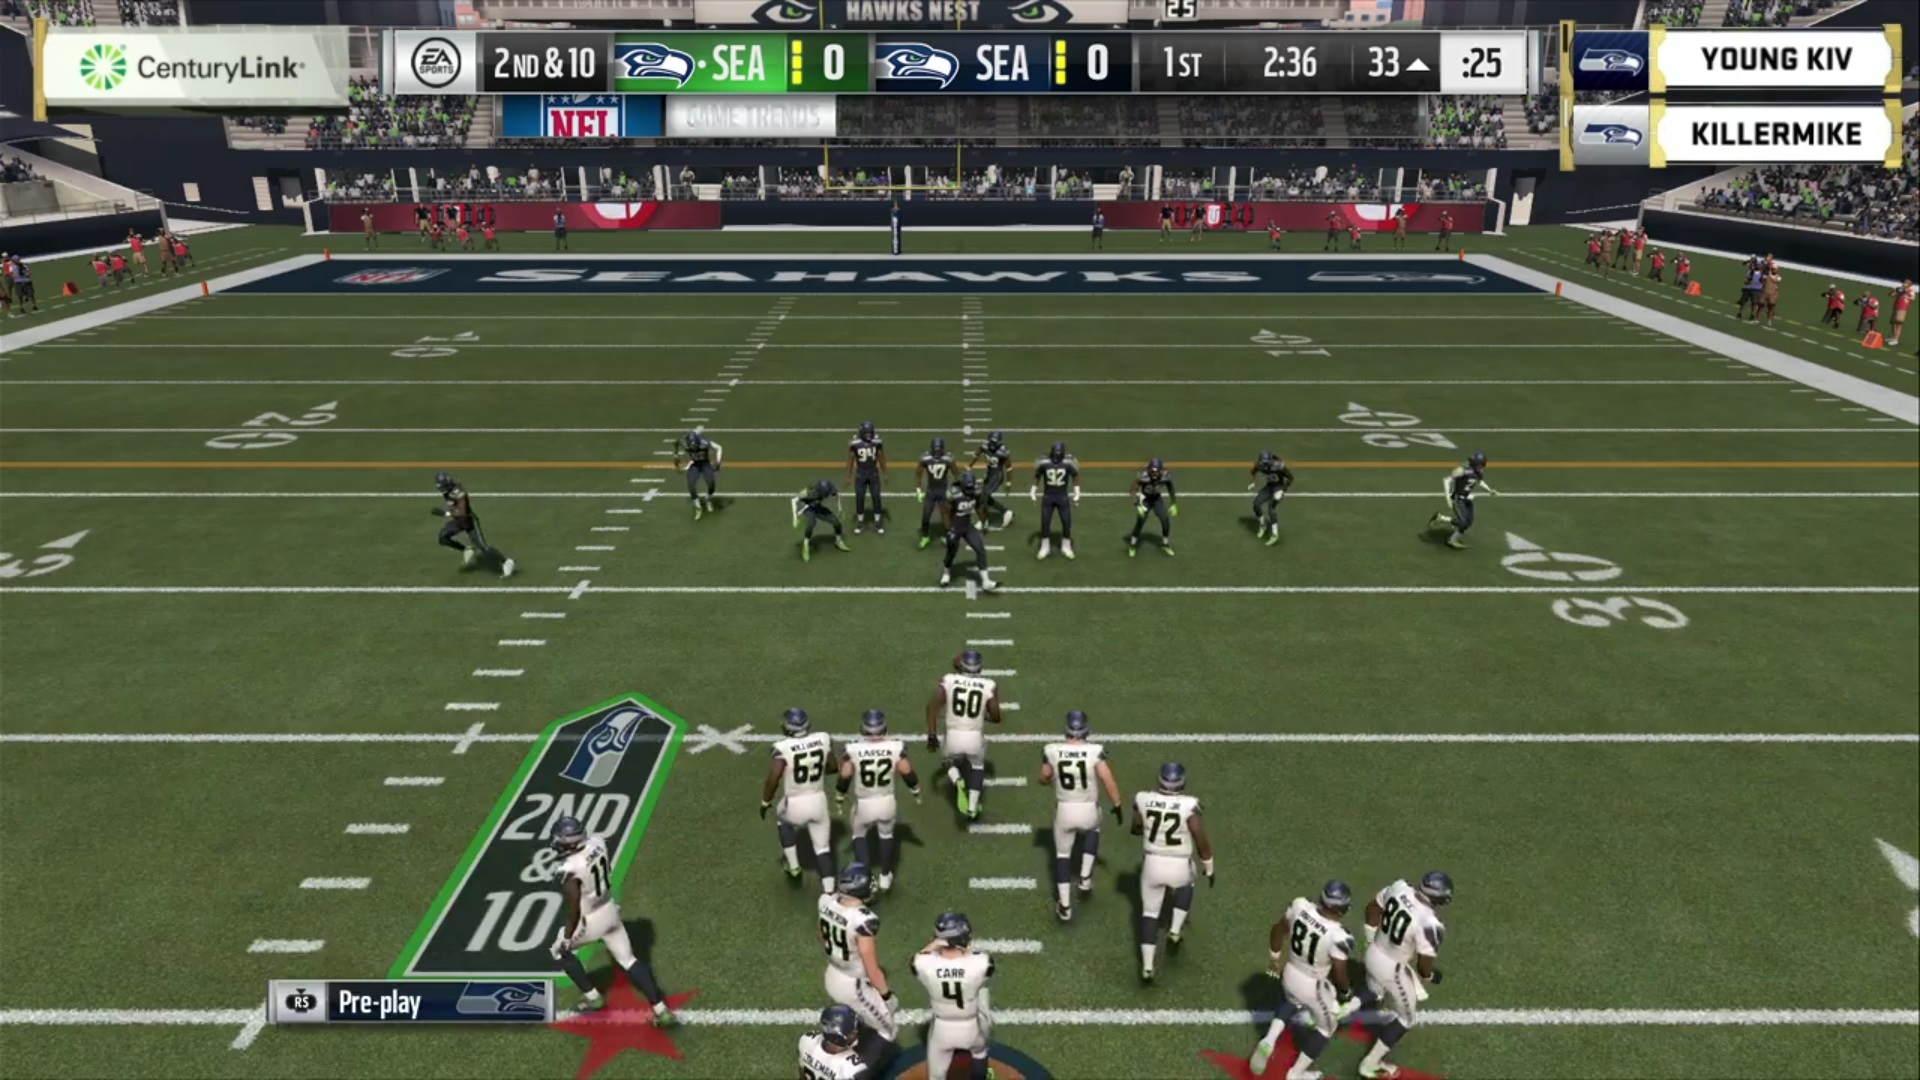 Rotating banner advertisement during Seahawks Championship (Photo: EAMaddenNFL TwitchTV Channel)